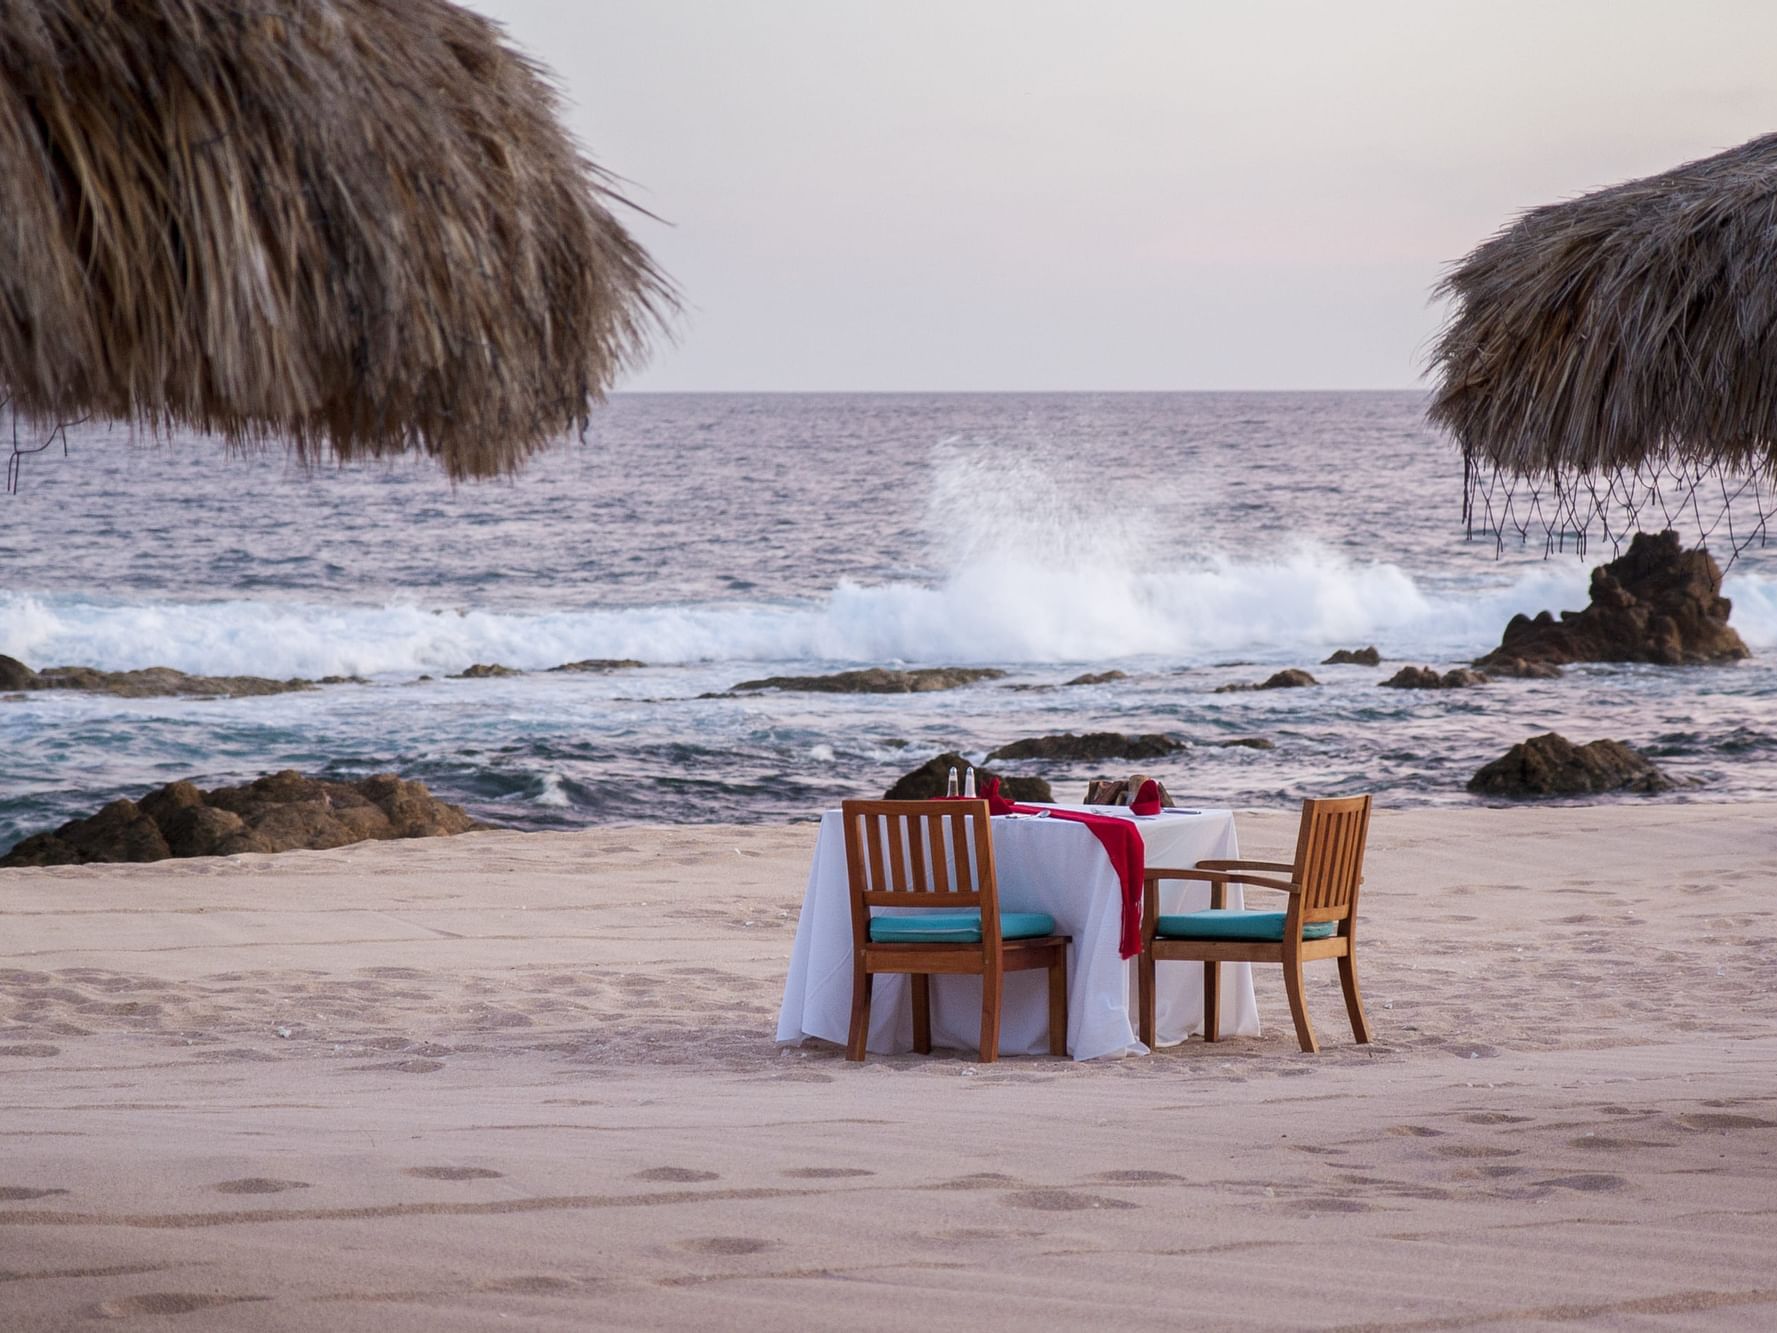 Arranged dining area in the beach in Los Cabos city